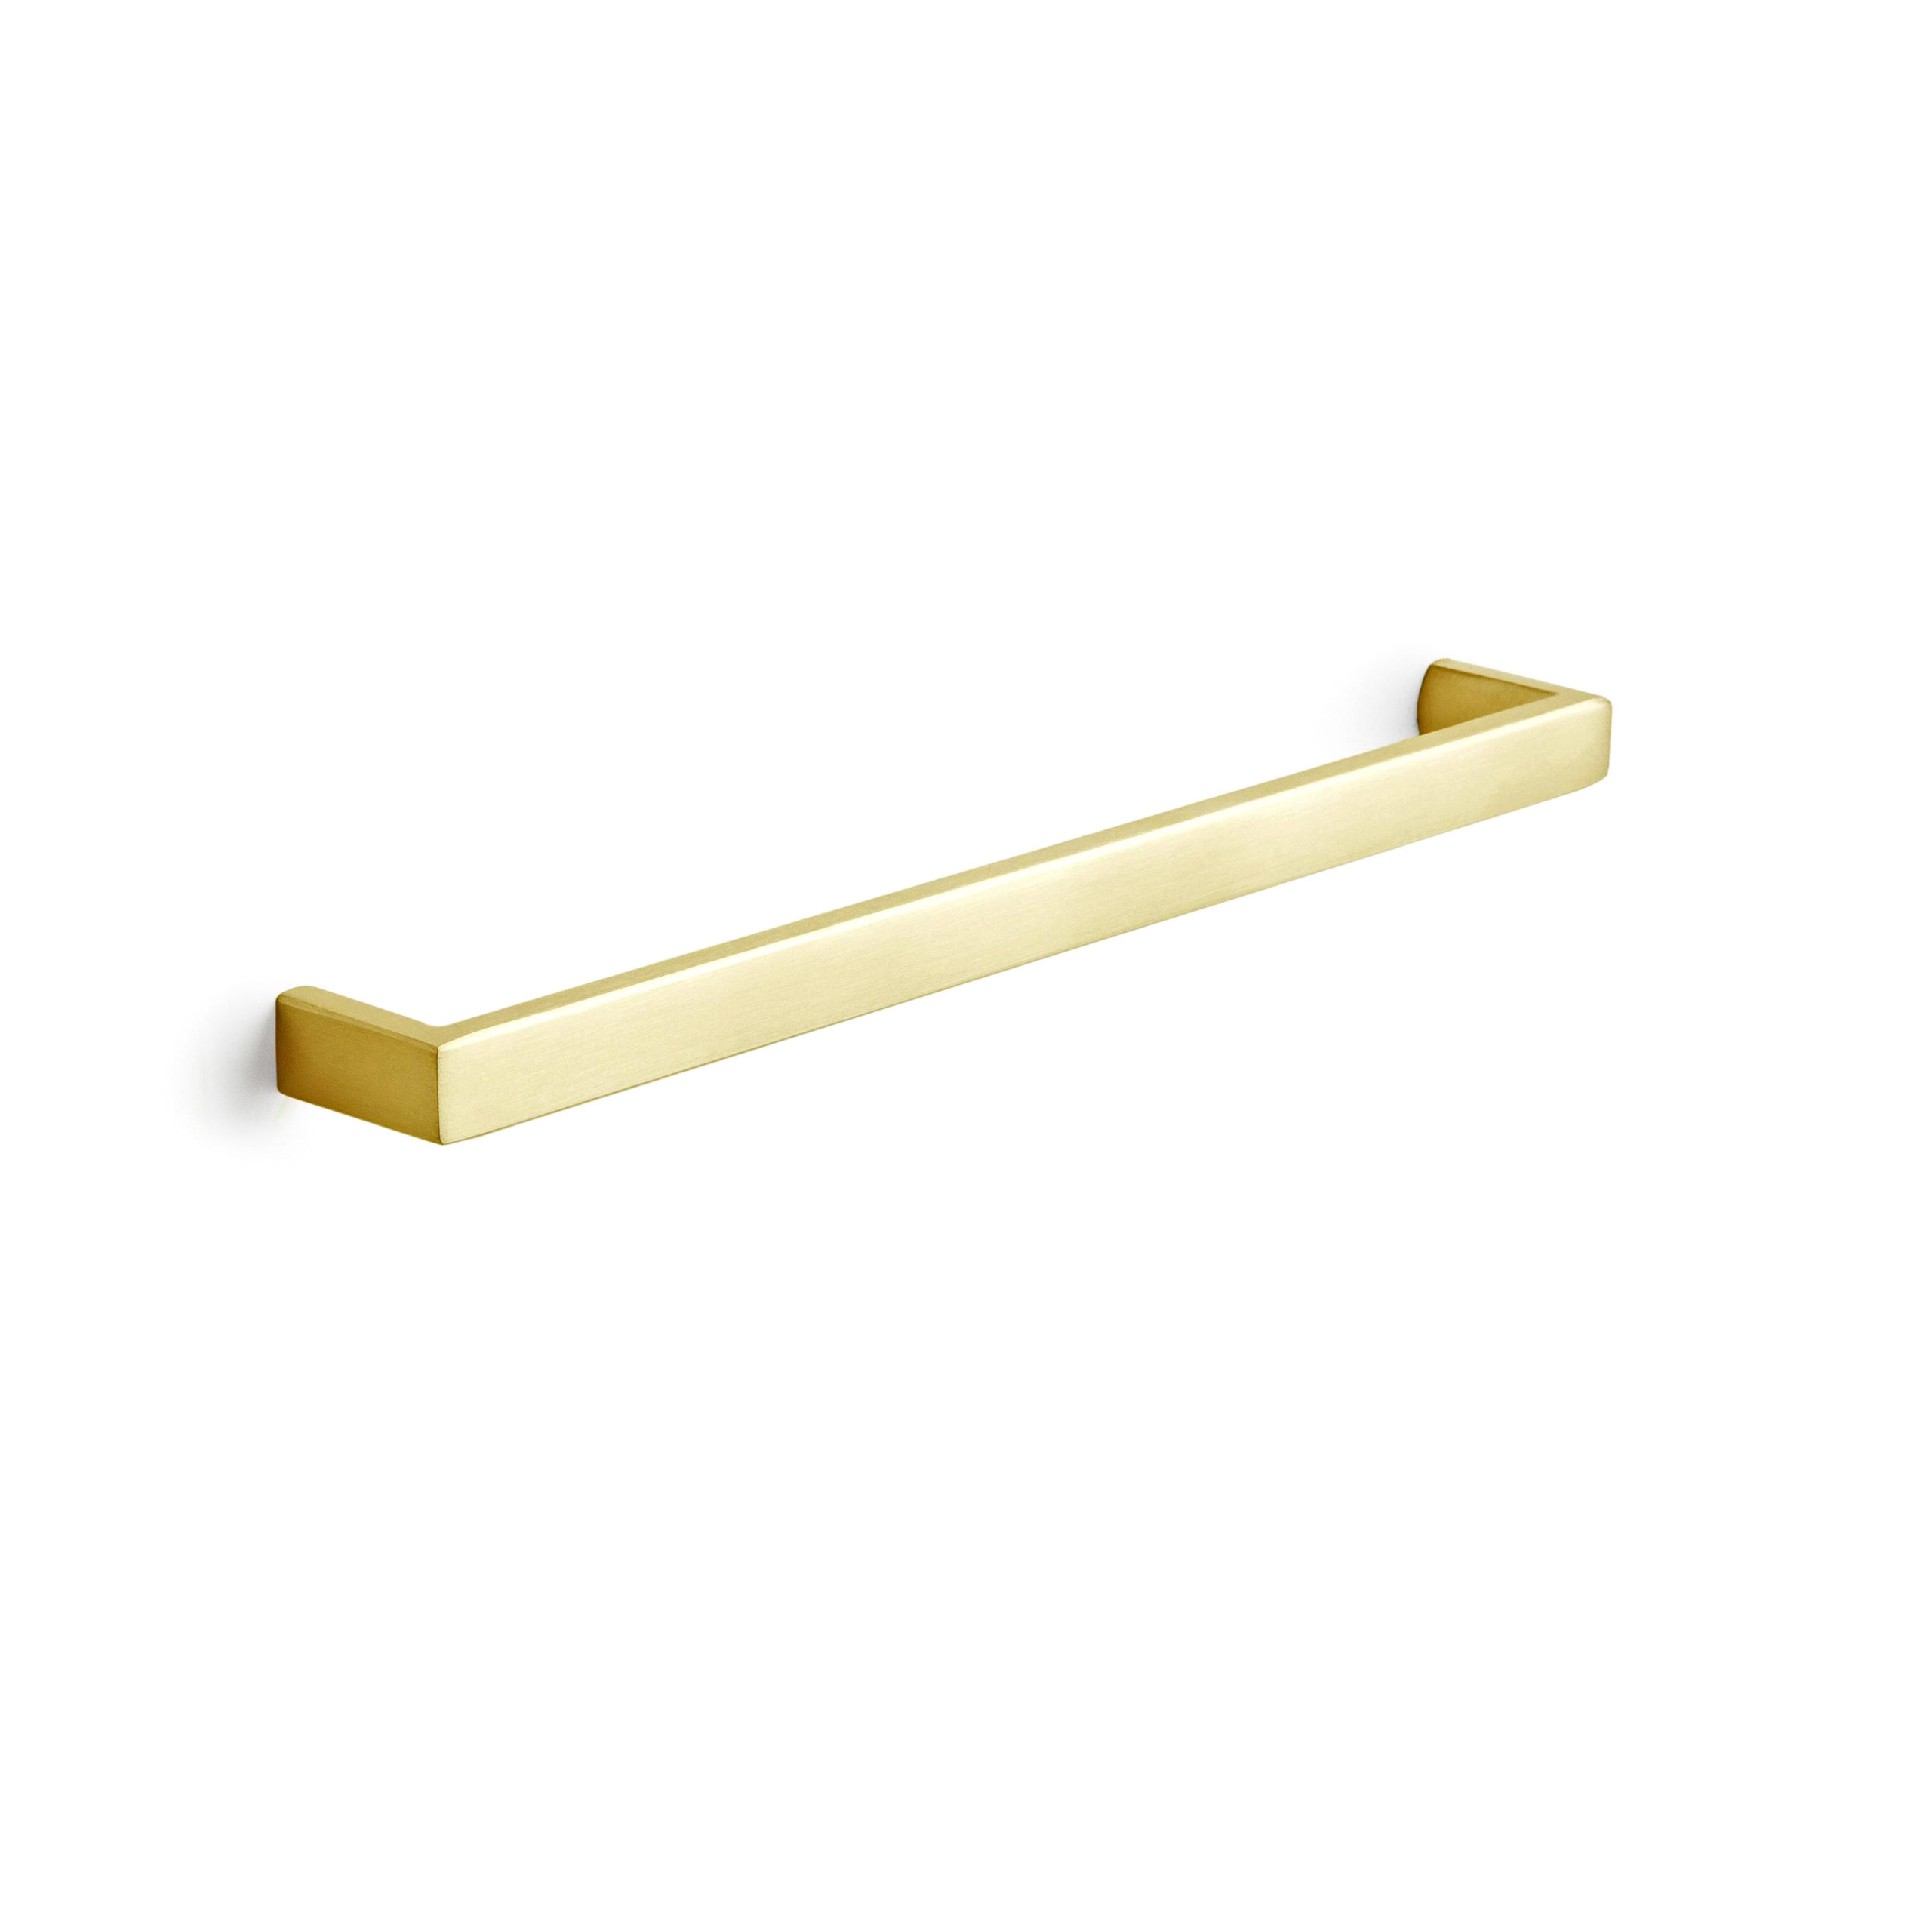 Satin brass modern cabinet door pull - product featured image - 7.5 inch 192 mm length - product SKU I 202 SBZ